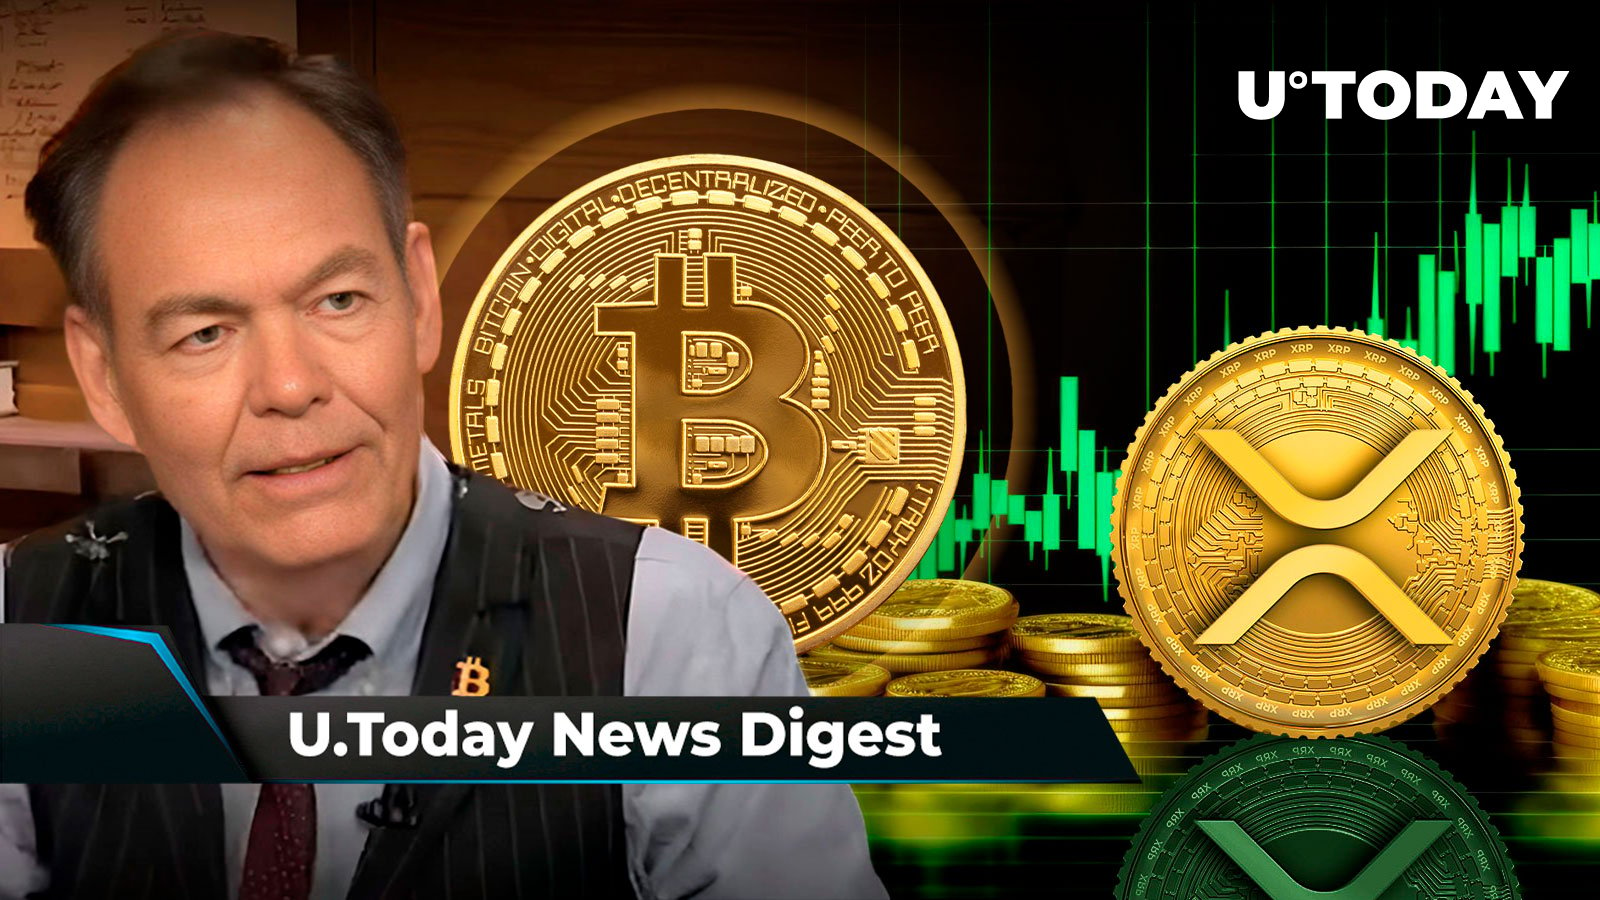 Bitcoin to $150,000? Bernstein Says Yes